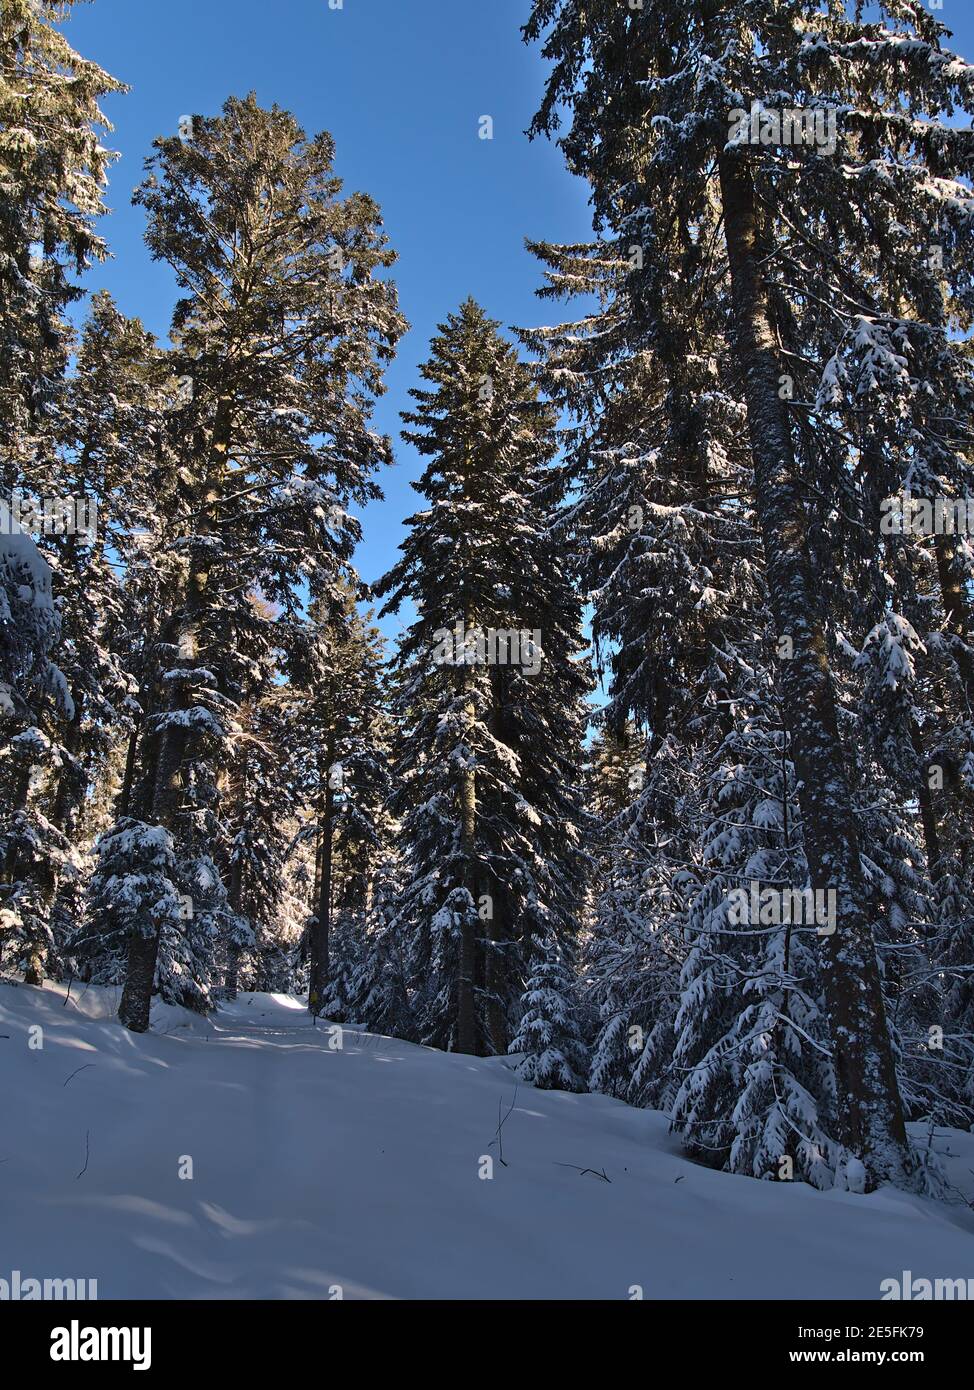 Beautiful portrait view of coniferous forest in deep snow with snow-covered tall spruce trees in winter season near Kniebis, Freudenstadt, Germany. Stock Photo